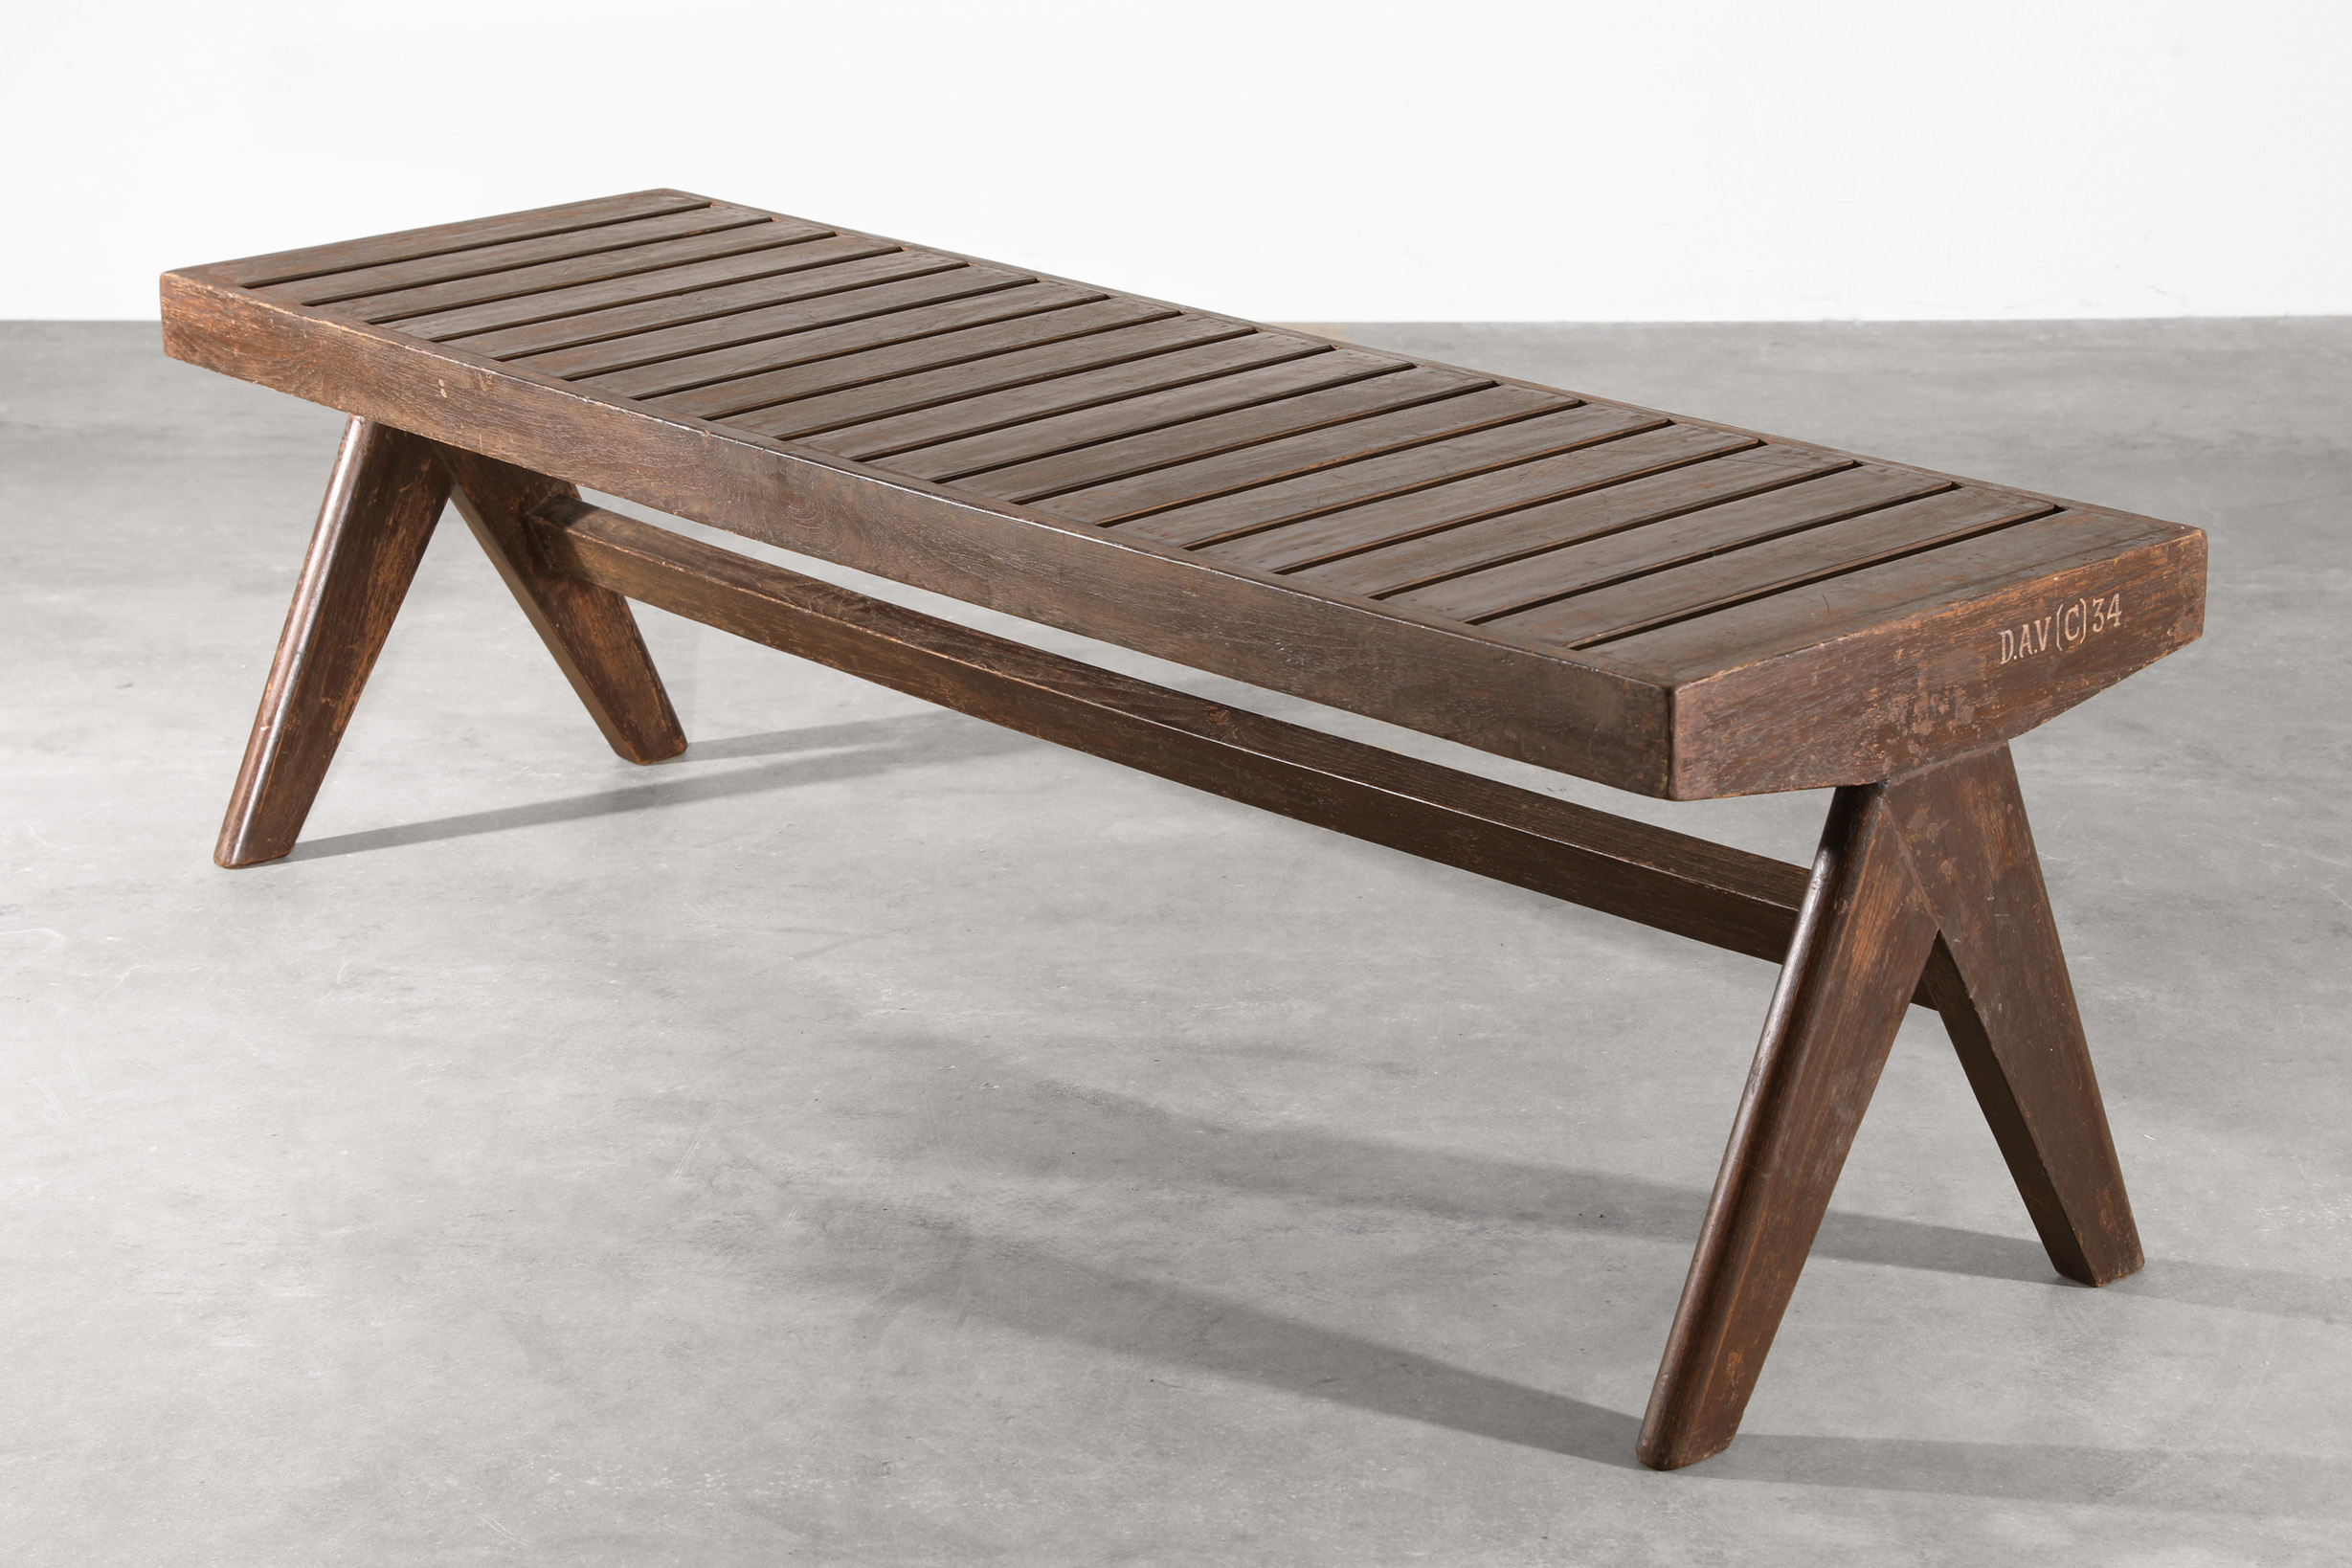 Pierre Jeanneret, Bench from the M.L.A. Residential building in Chandigarh